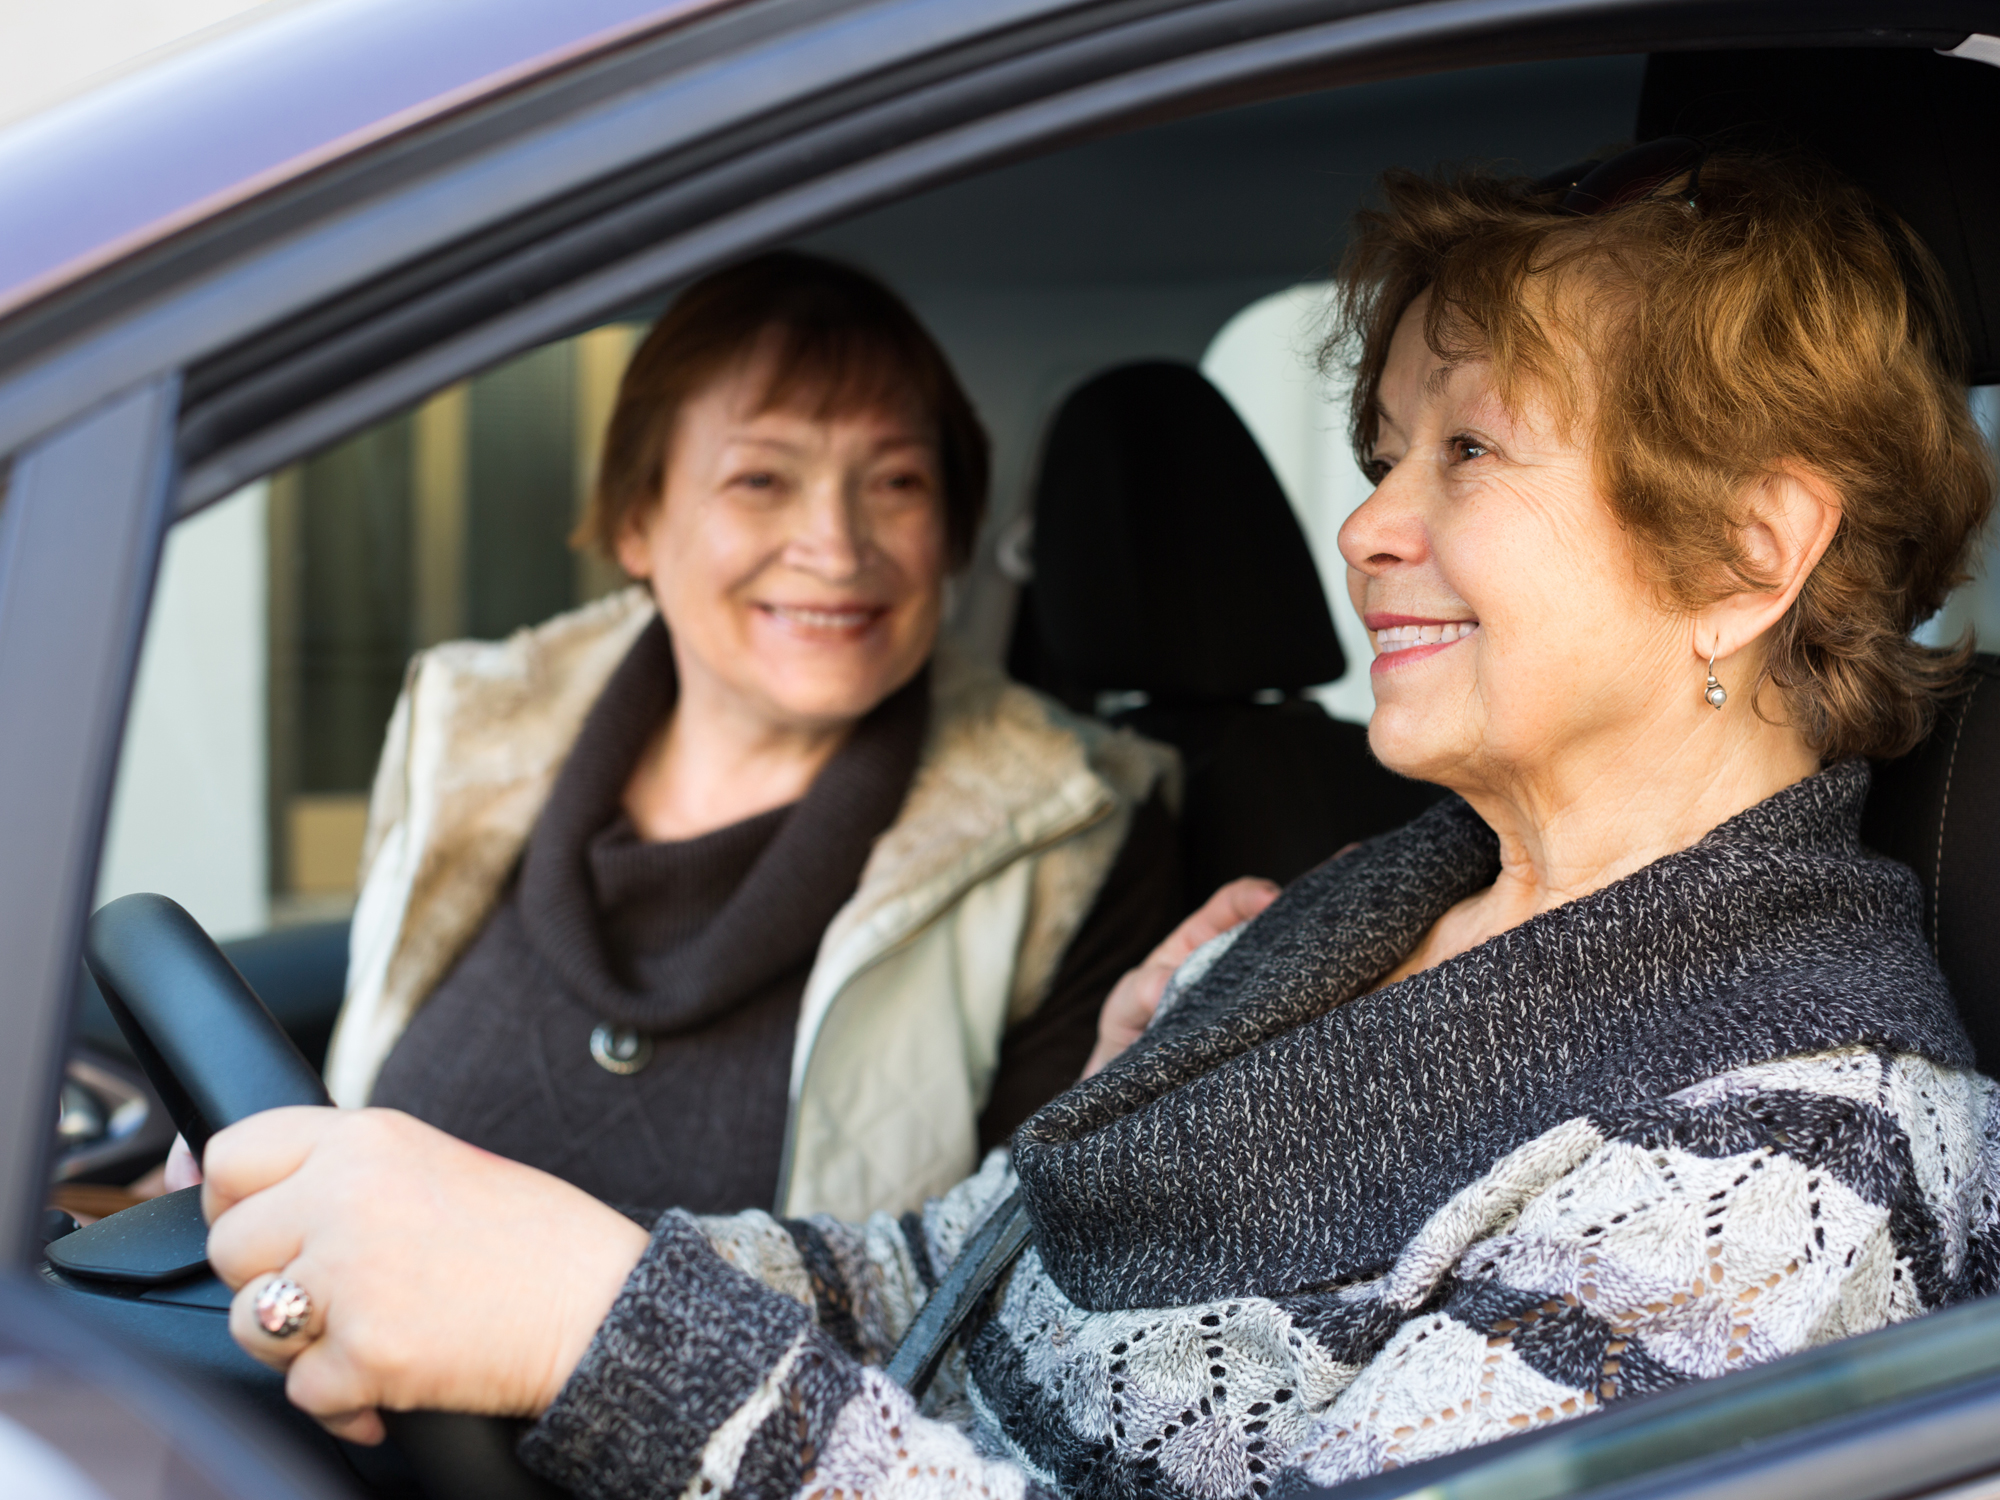 Seniors who get this training keep their driver’s licenses longer